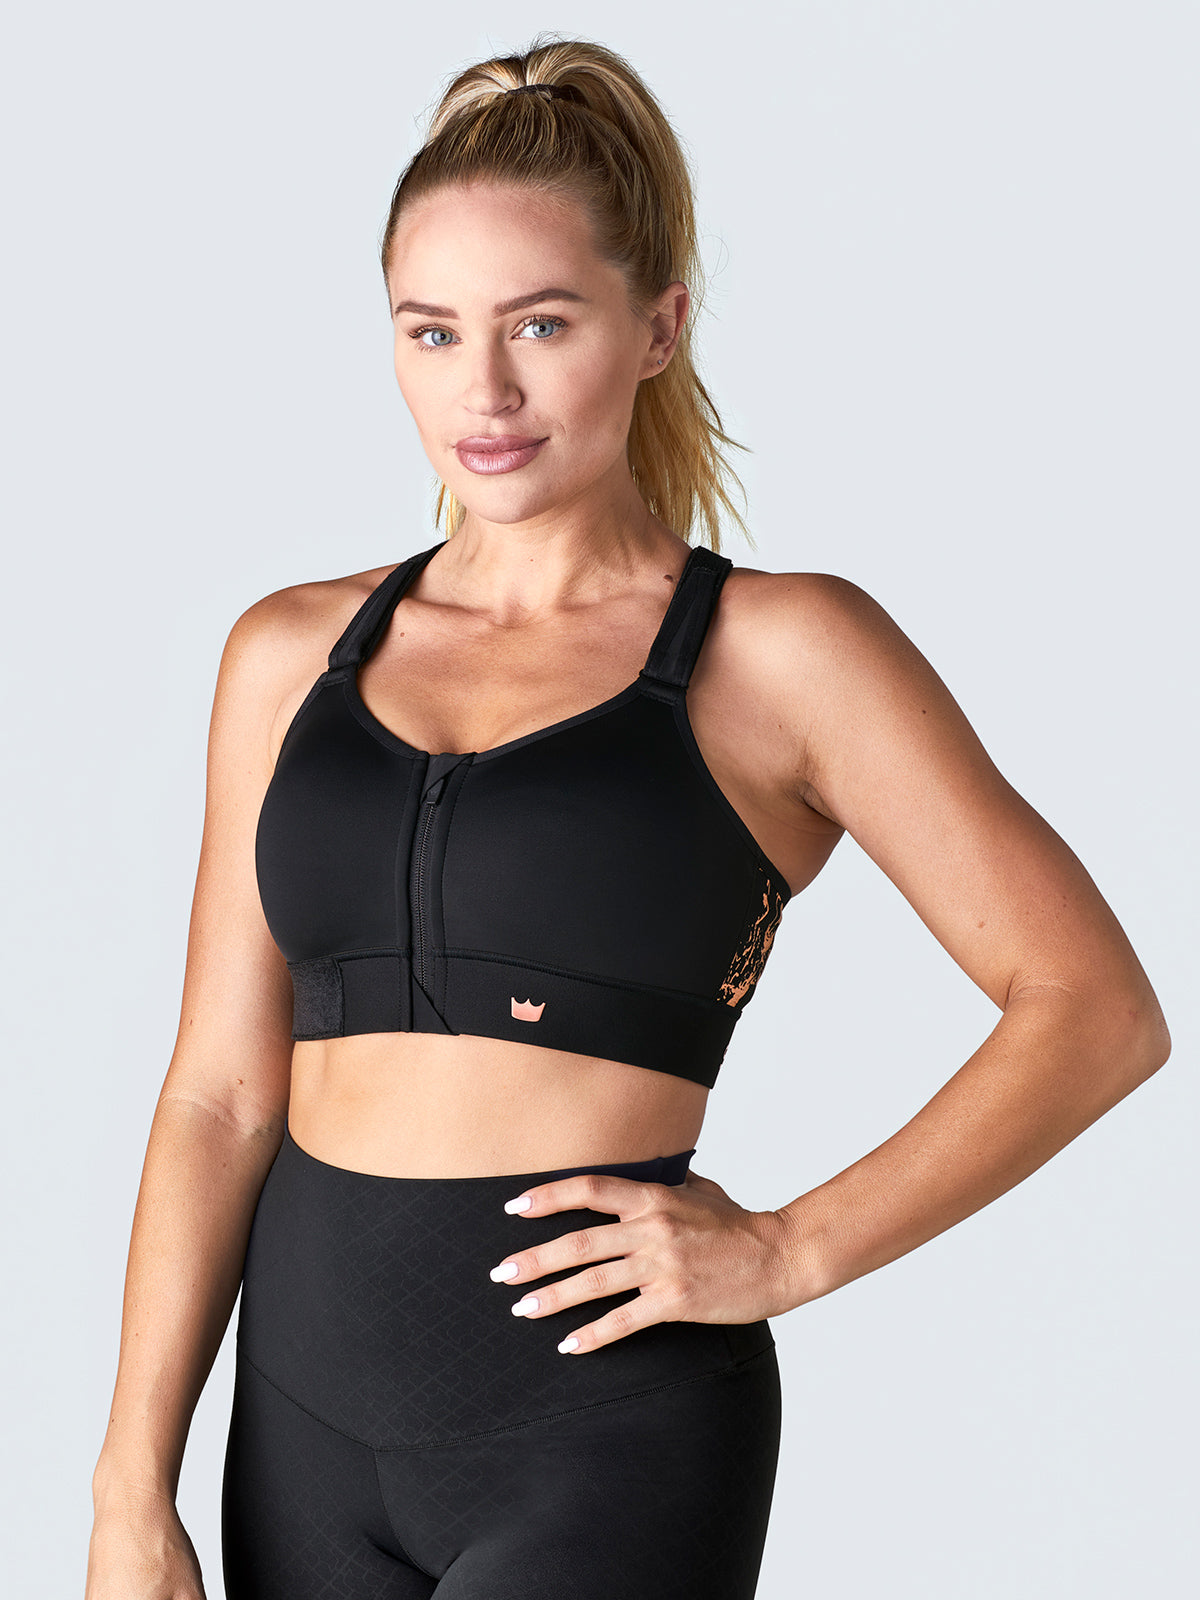 Friday Fashion Forecast: Corral Your 'Showshirt Ponies' With a SheFit Sports  Bra